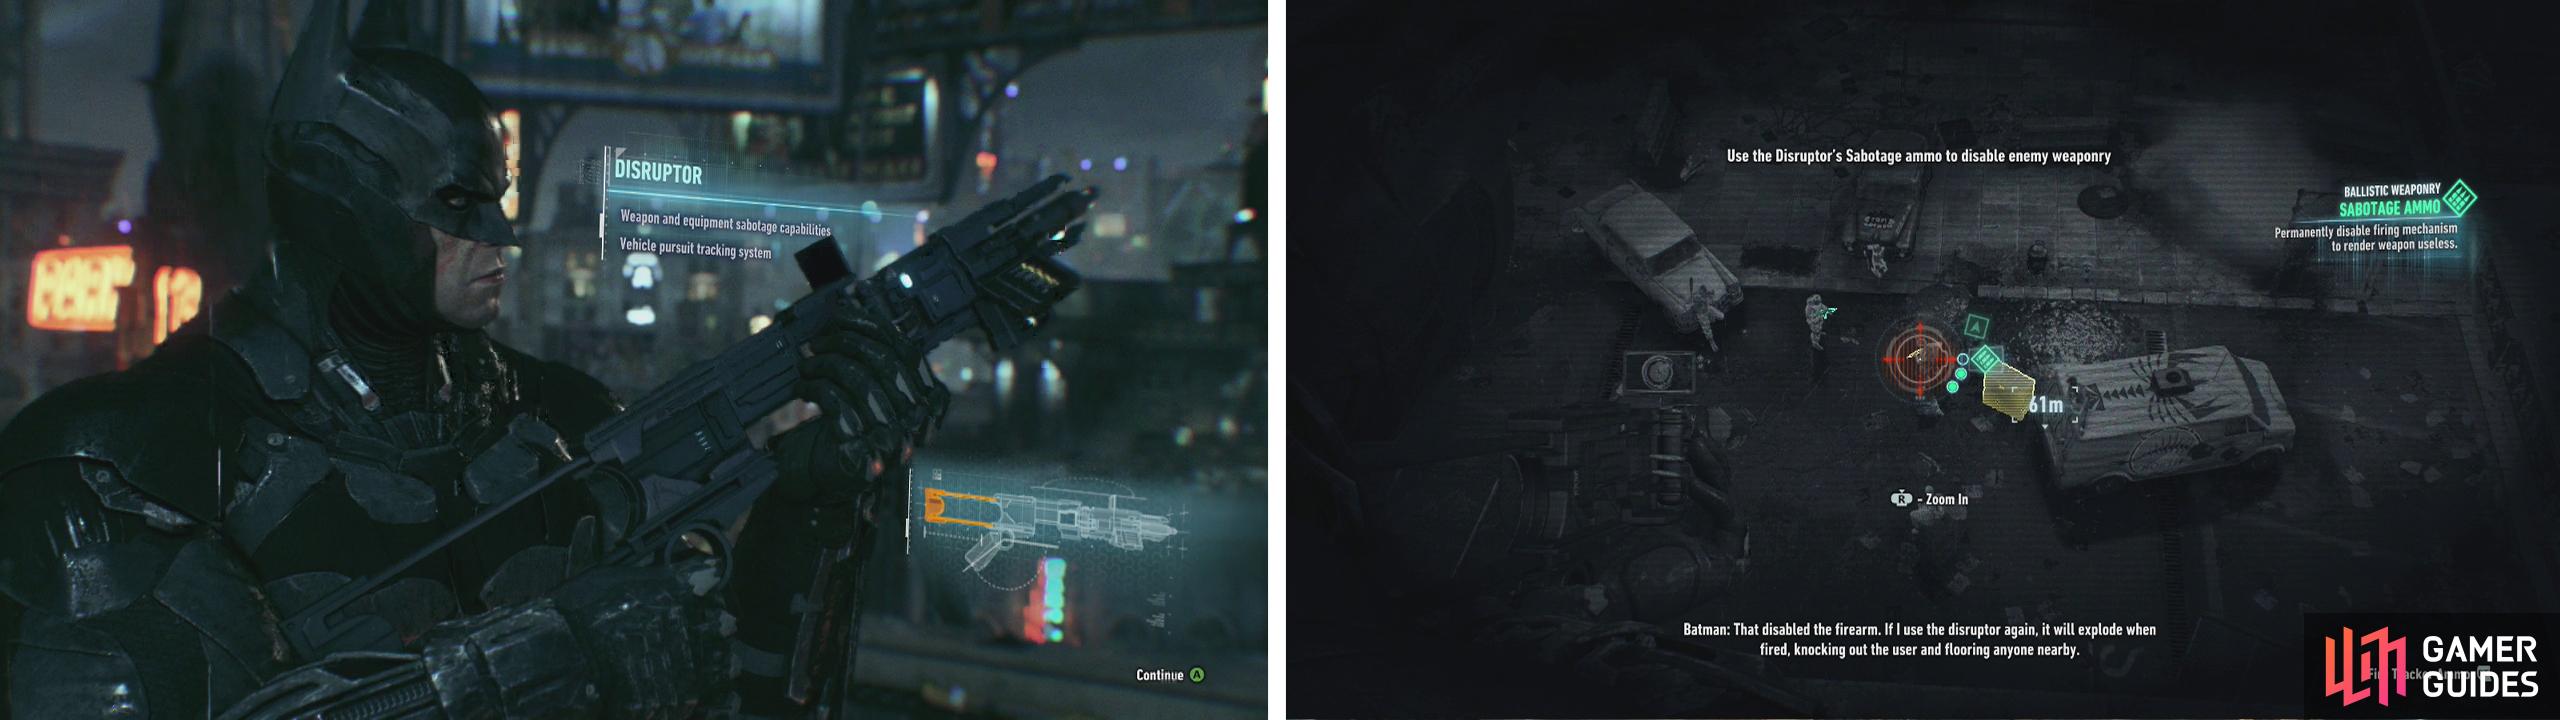 After getting the Disruptor (left) you'll be able to sabotage enemy weapons and weapon crates (right).